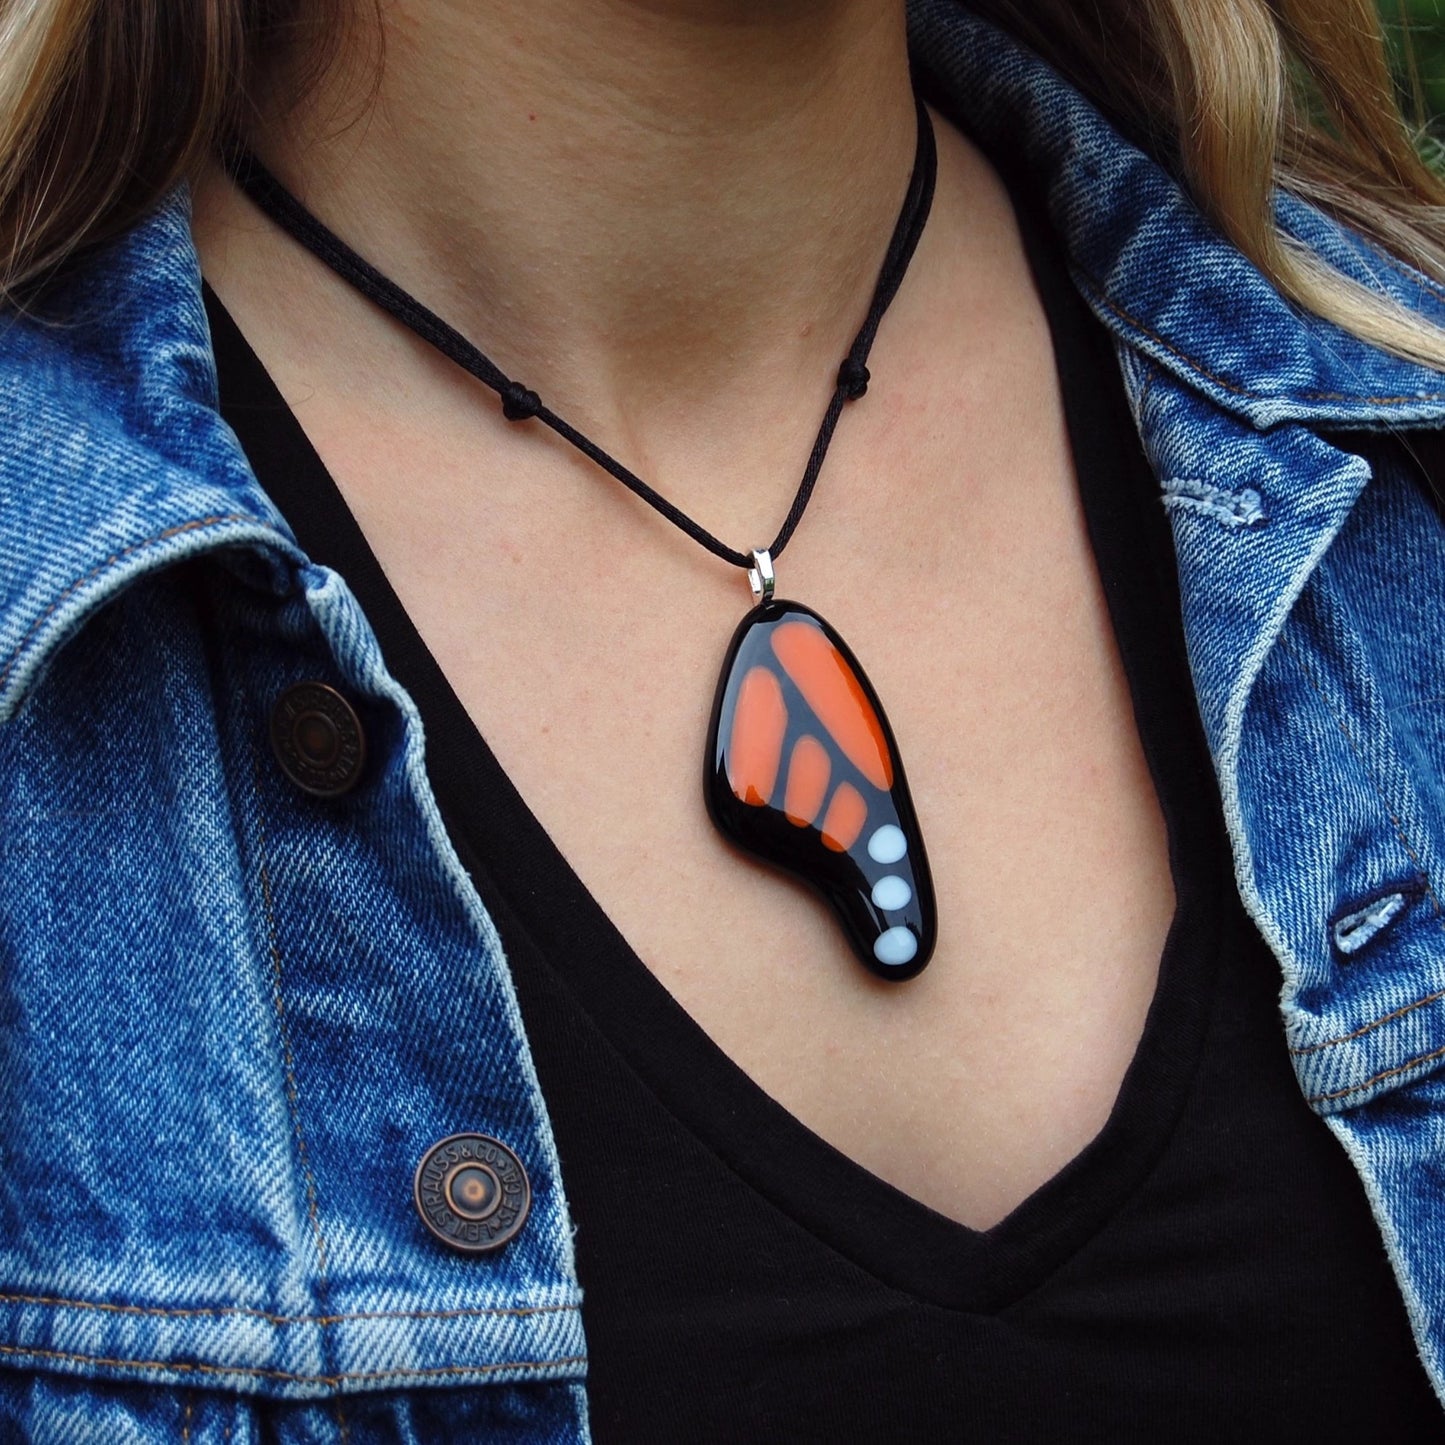 Blonde haired woman wearing a Made in Canada monarch butterfly necklace with a black tee shirt and jean jacket.